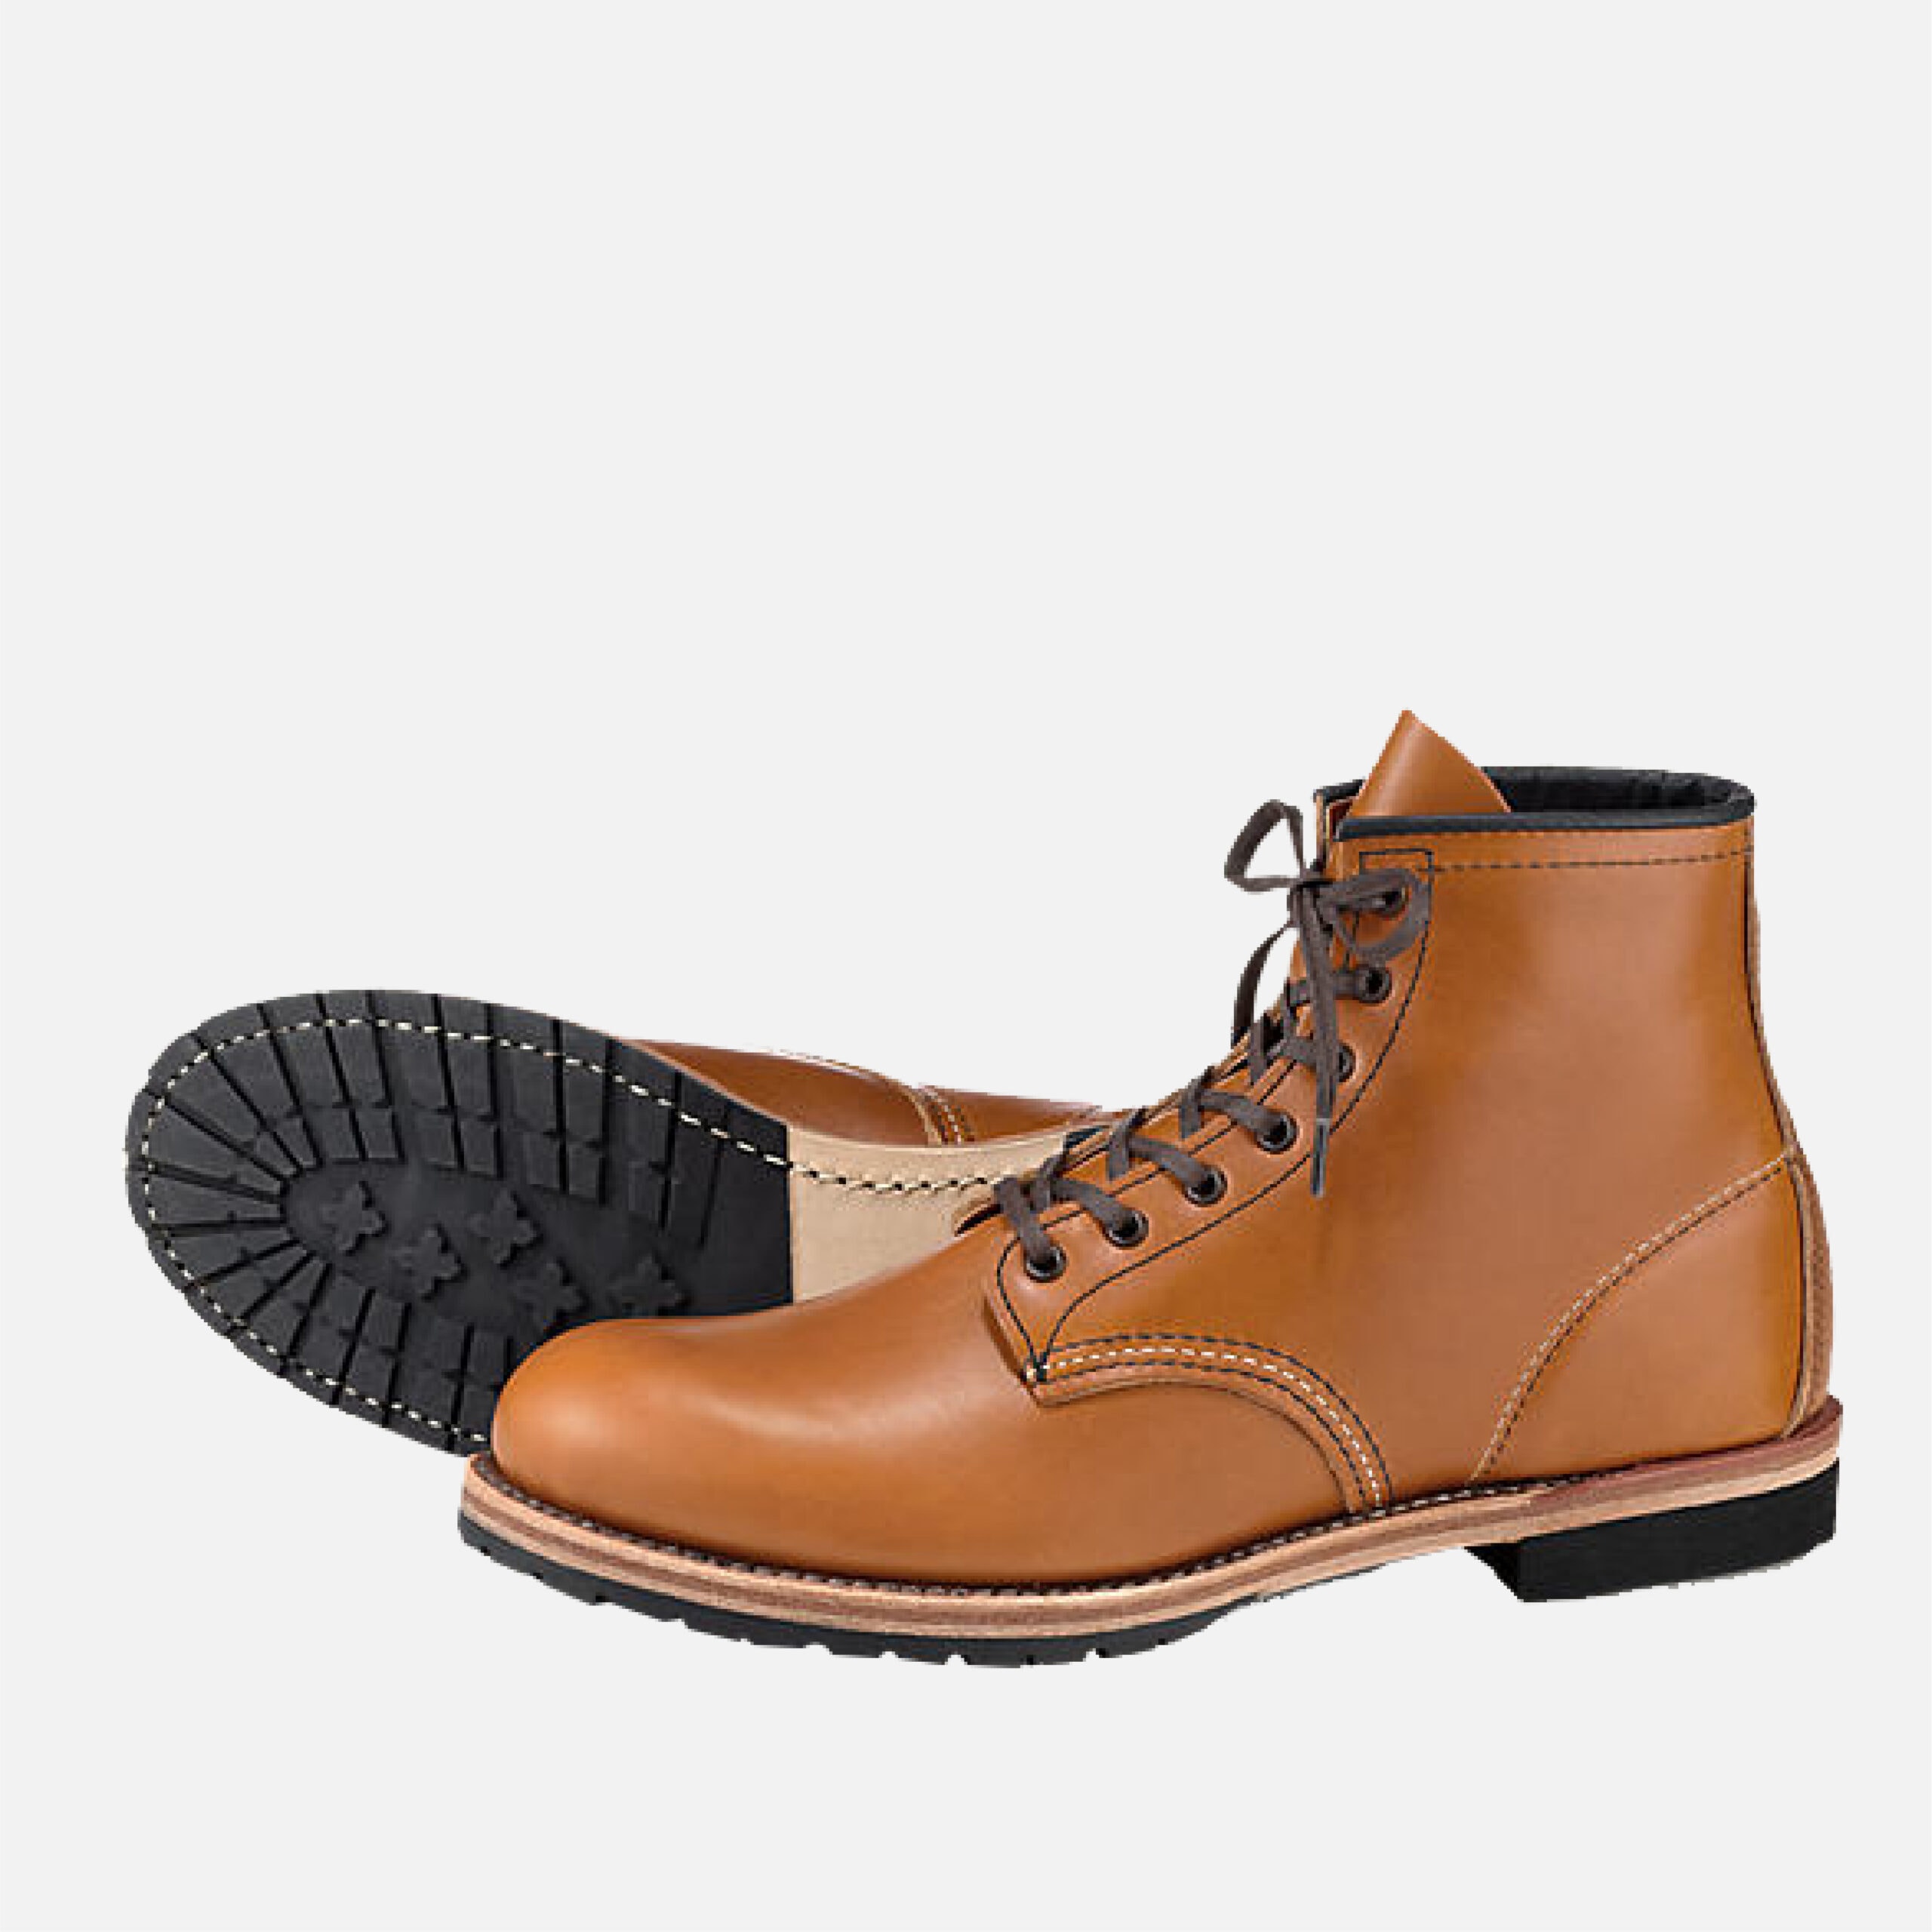 RED WING 9013 BECKMAN CHESTNUT FEATHERSTONE BOOT